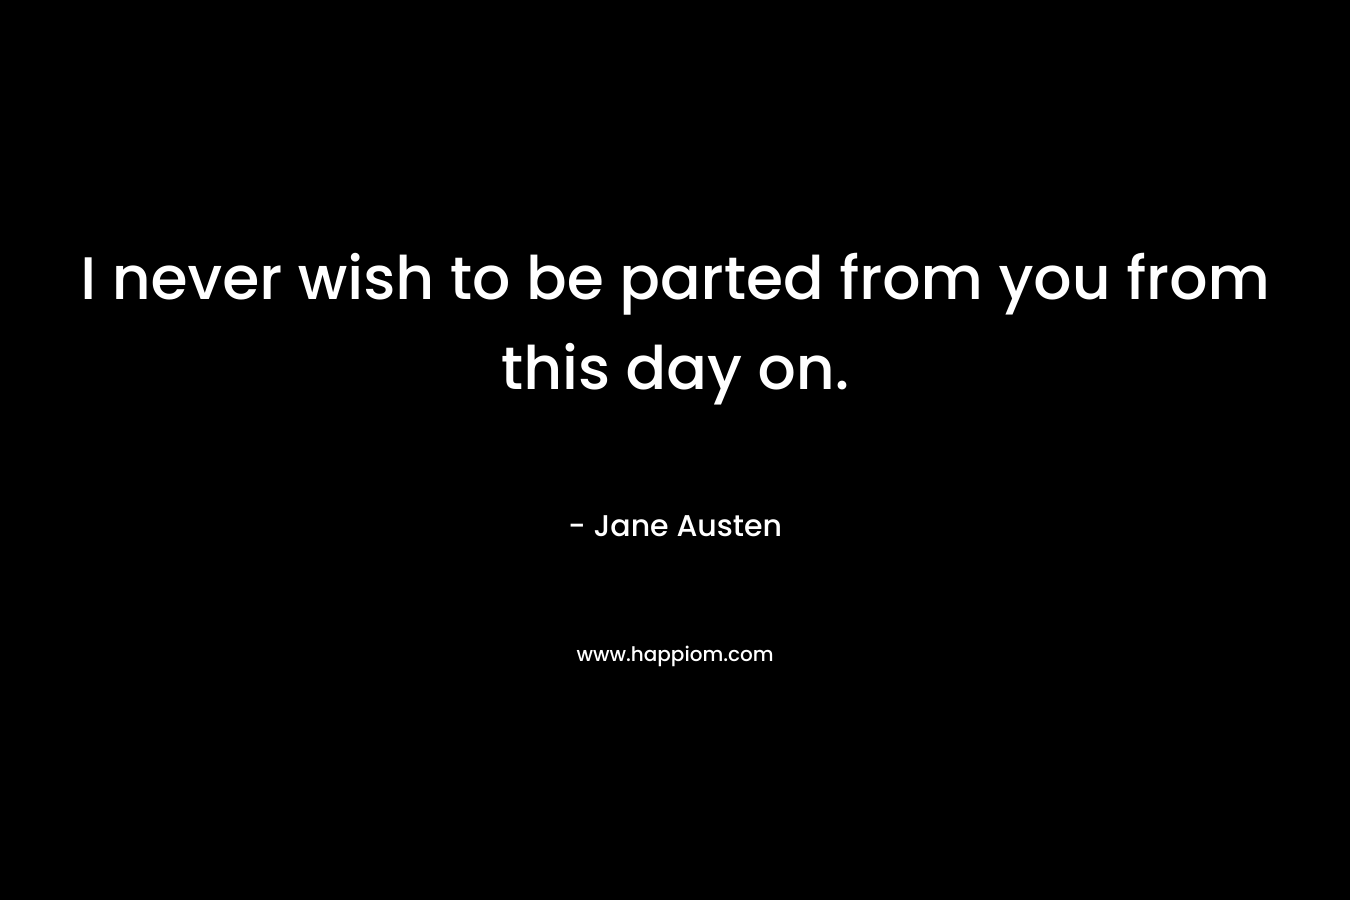 I never wish to be parted from you from this day on. – Jane Austen